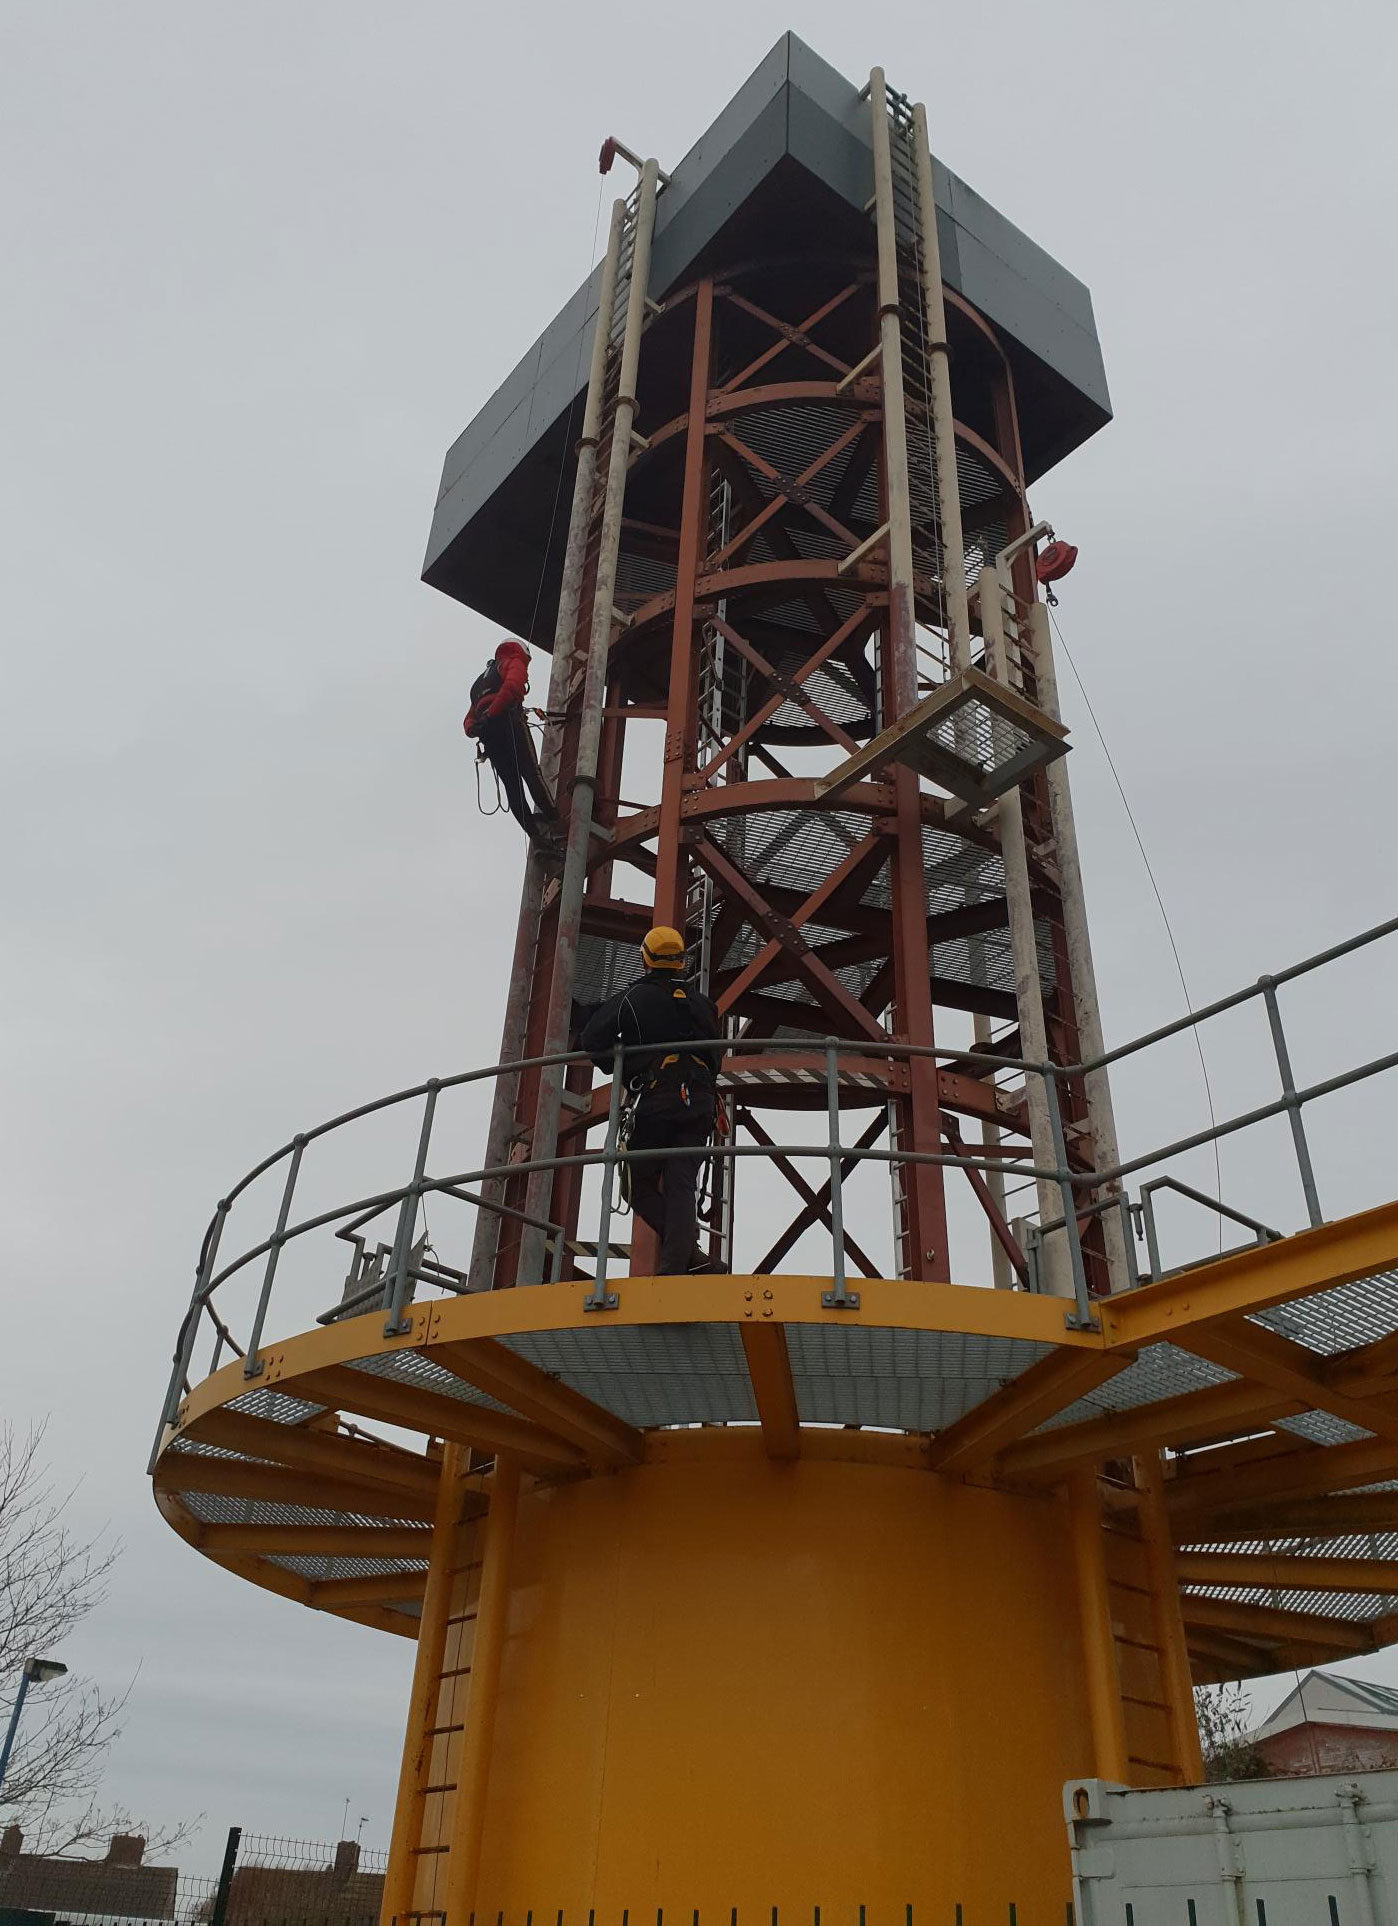 Organisation Image (Offshore Wind Skills Centre: Working at Heights)